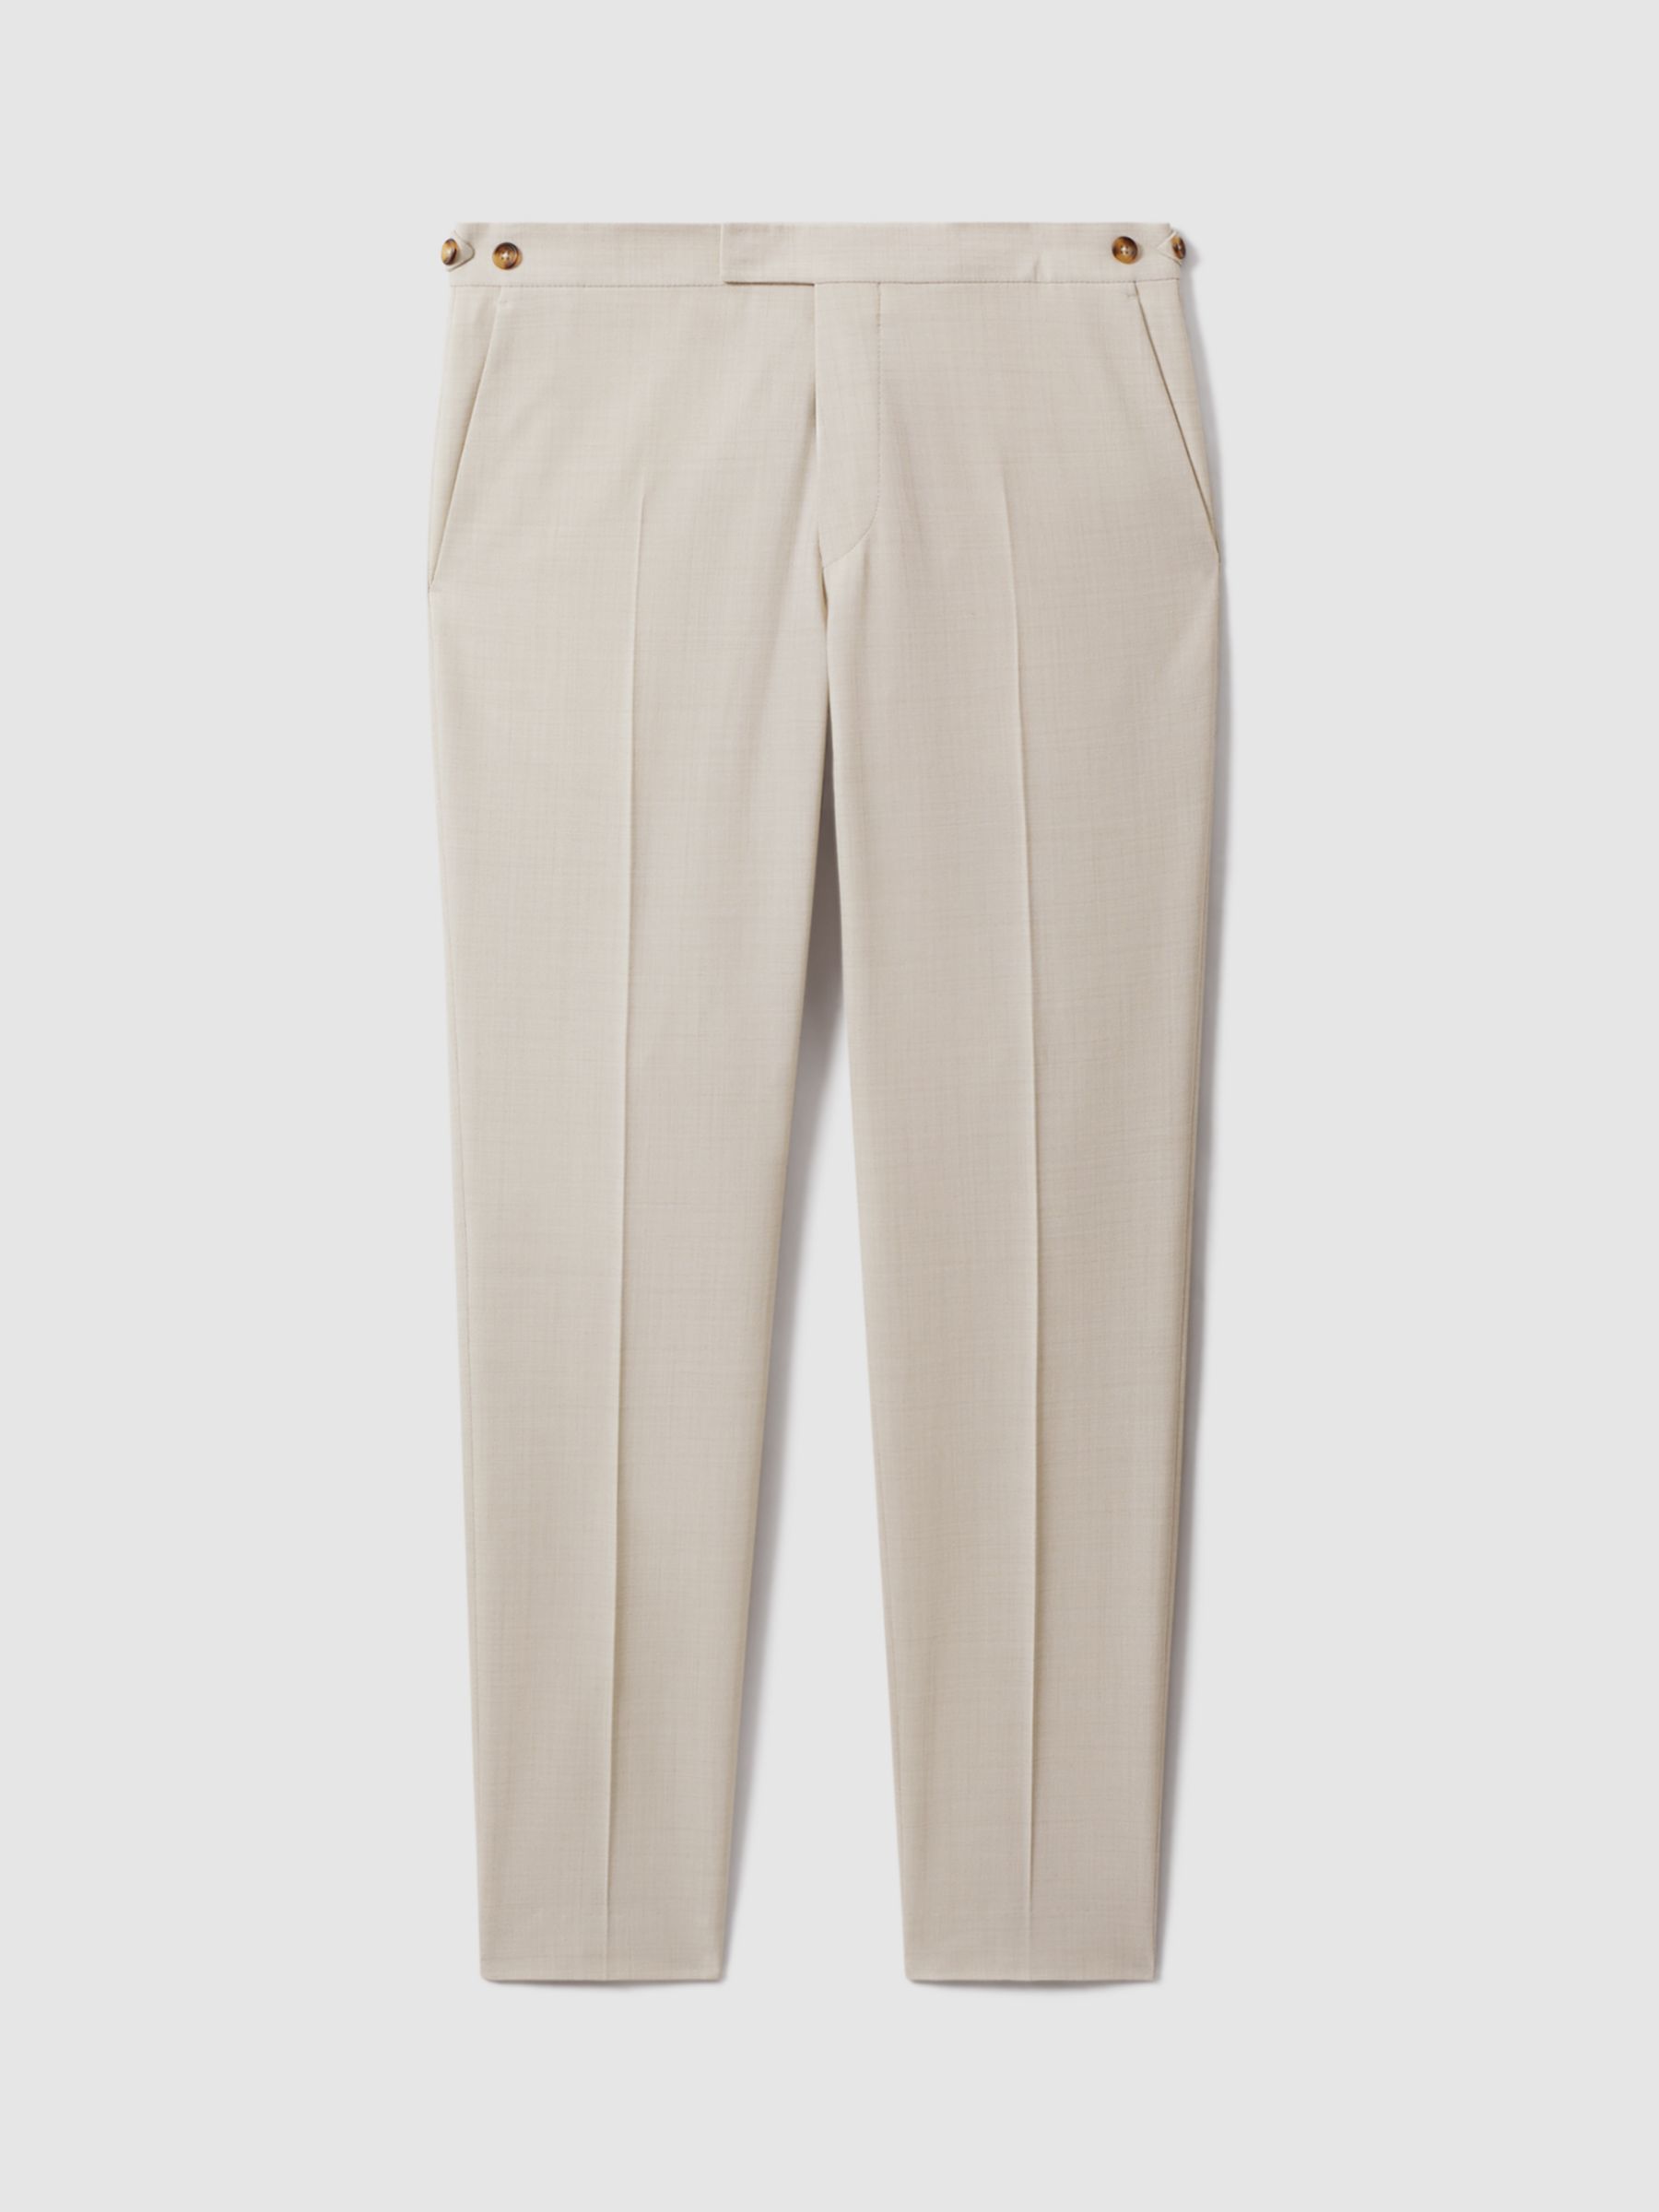 Reiss Belmont Wool Blend Textured Weave Trousers, Stone, 28R